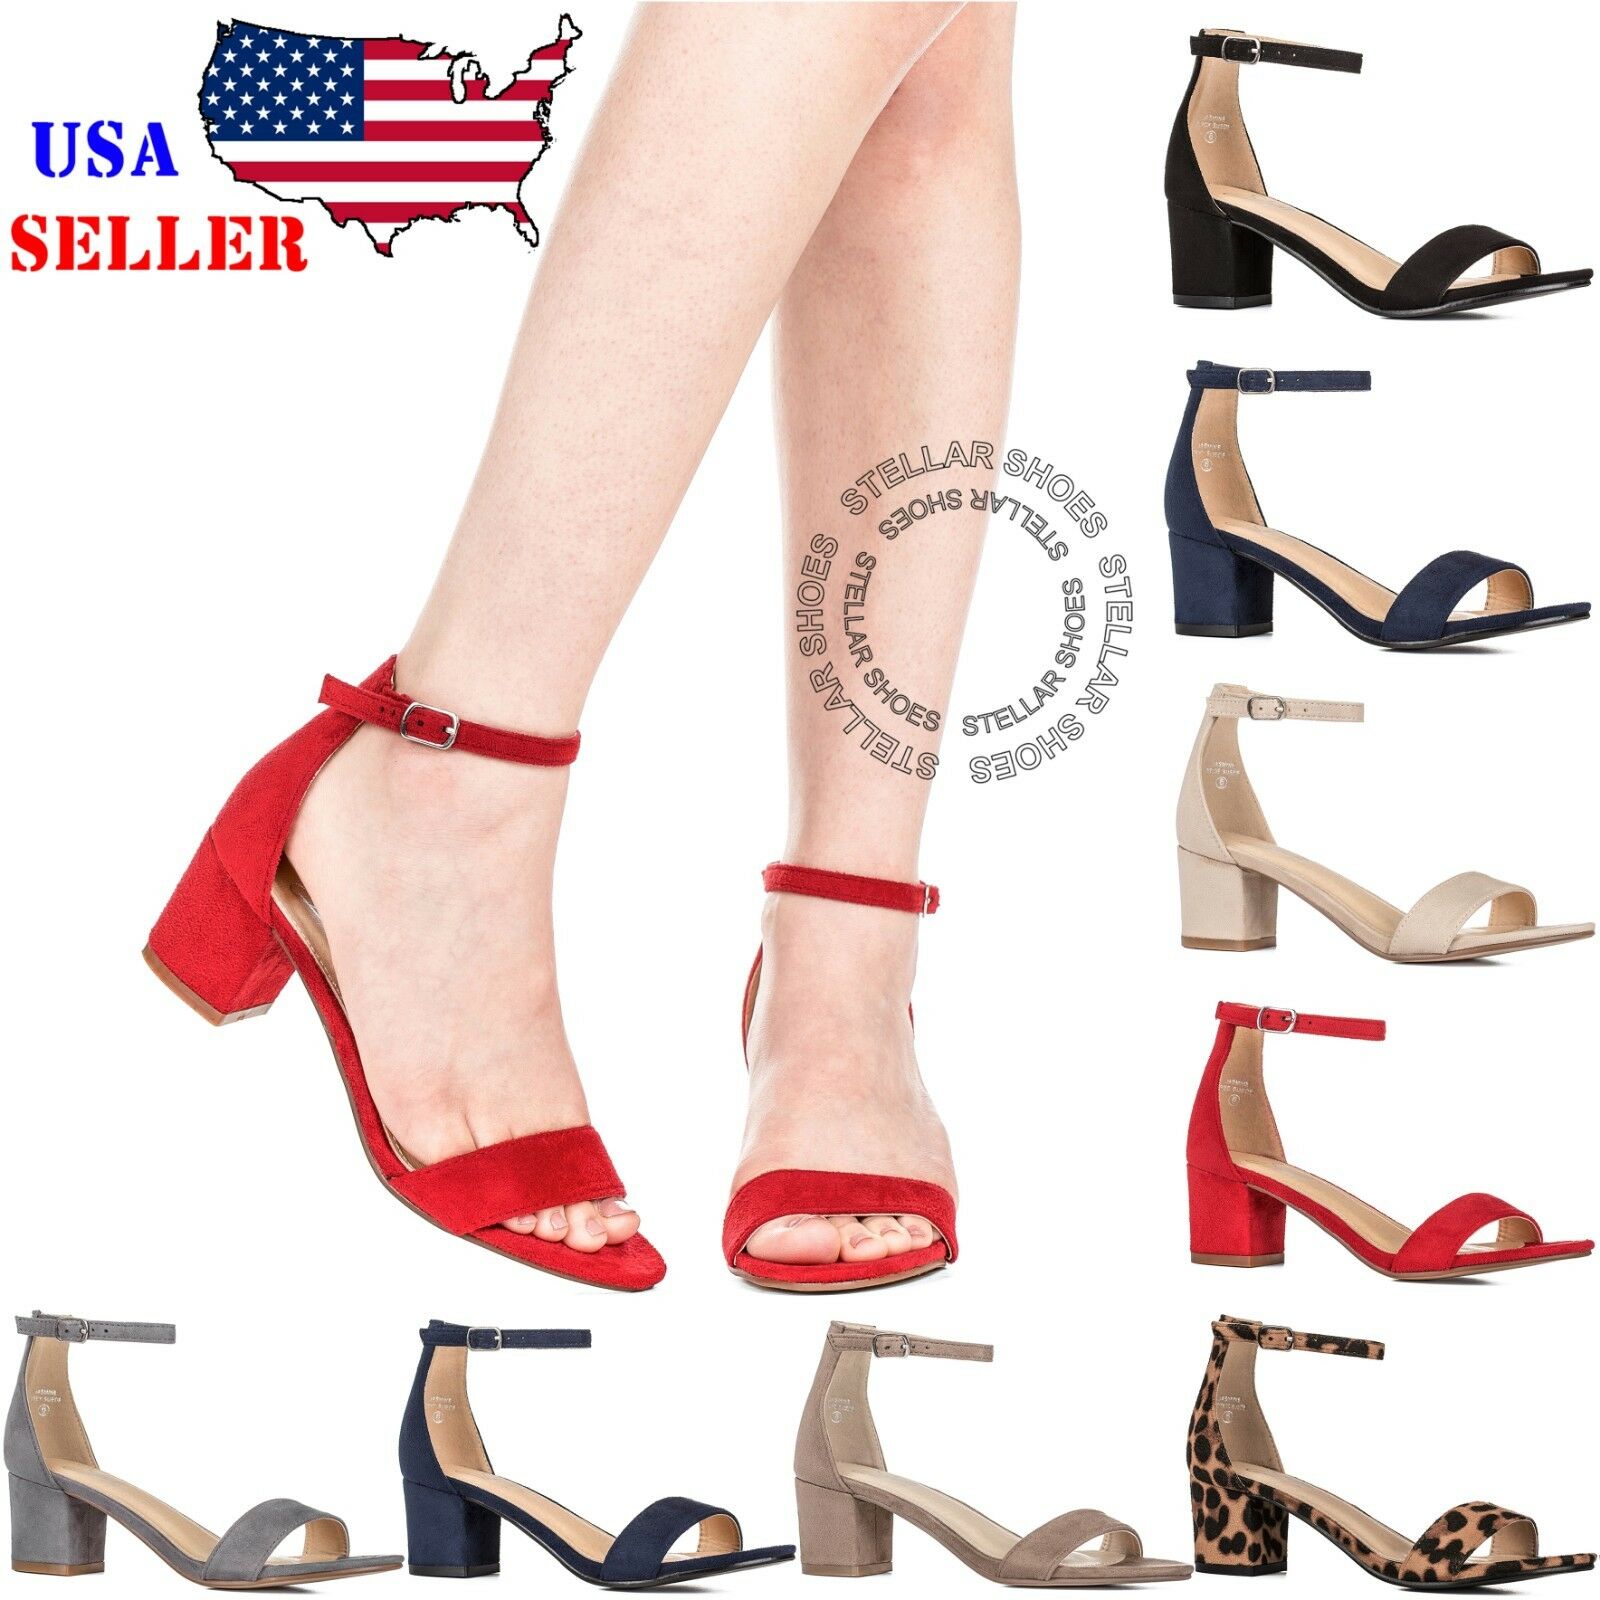 [new] Illude Women's Fashion Ankle Strap Chunky Heeled Sandals Heels